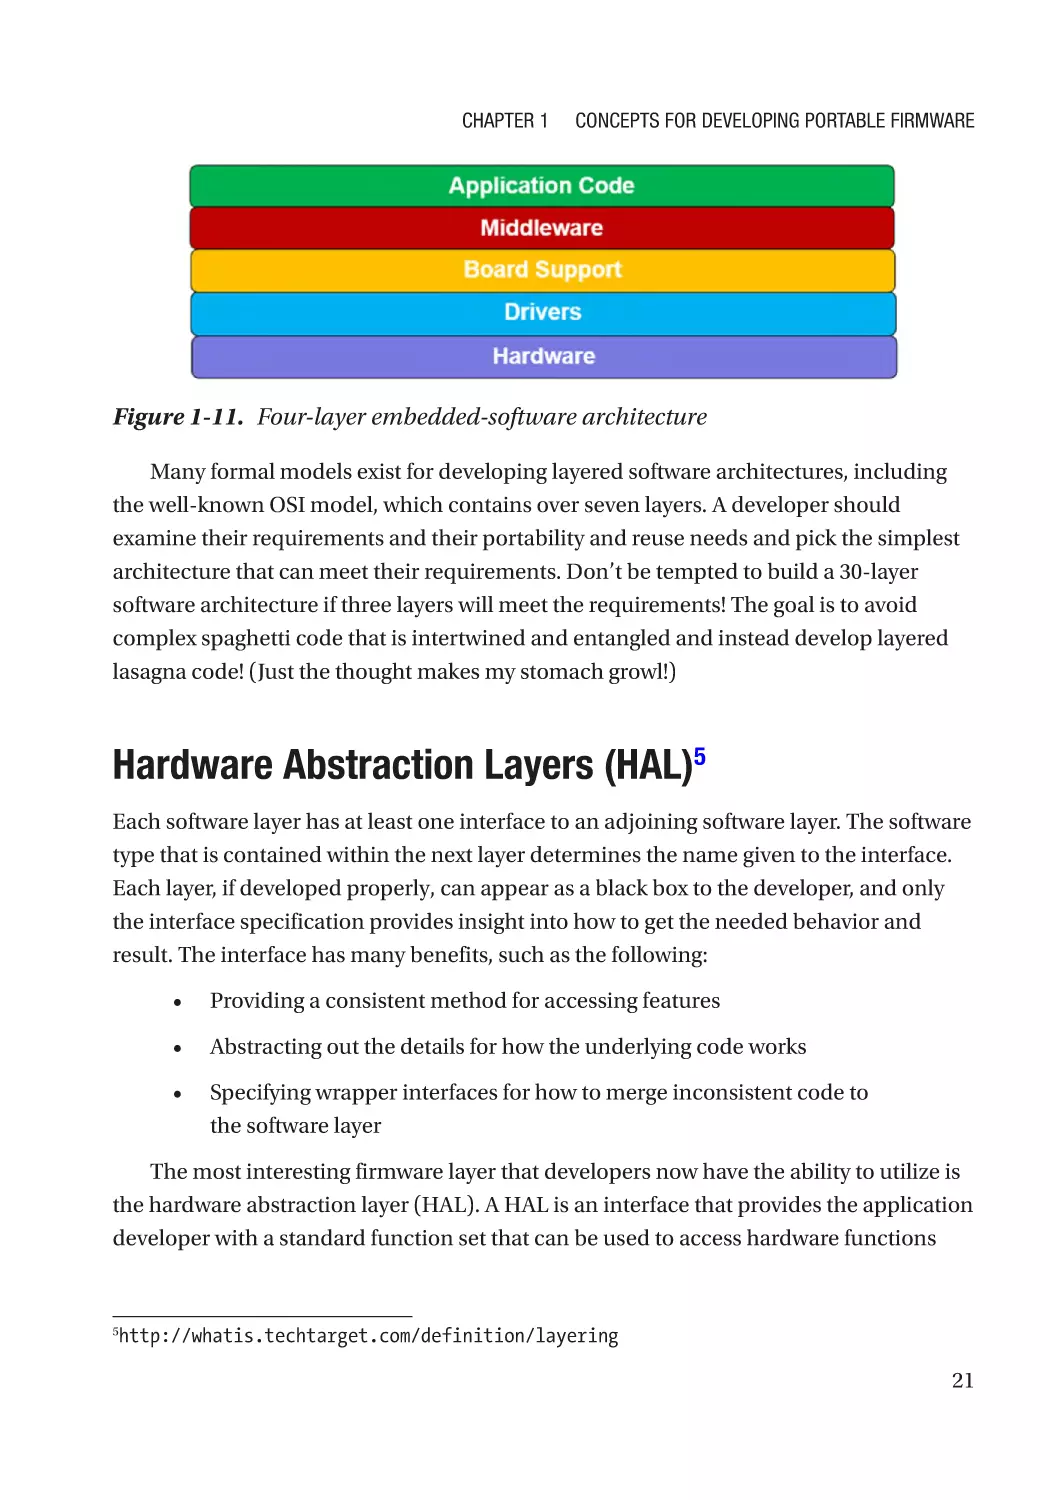 Hardware Abstraction Layers (HAL)5